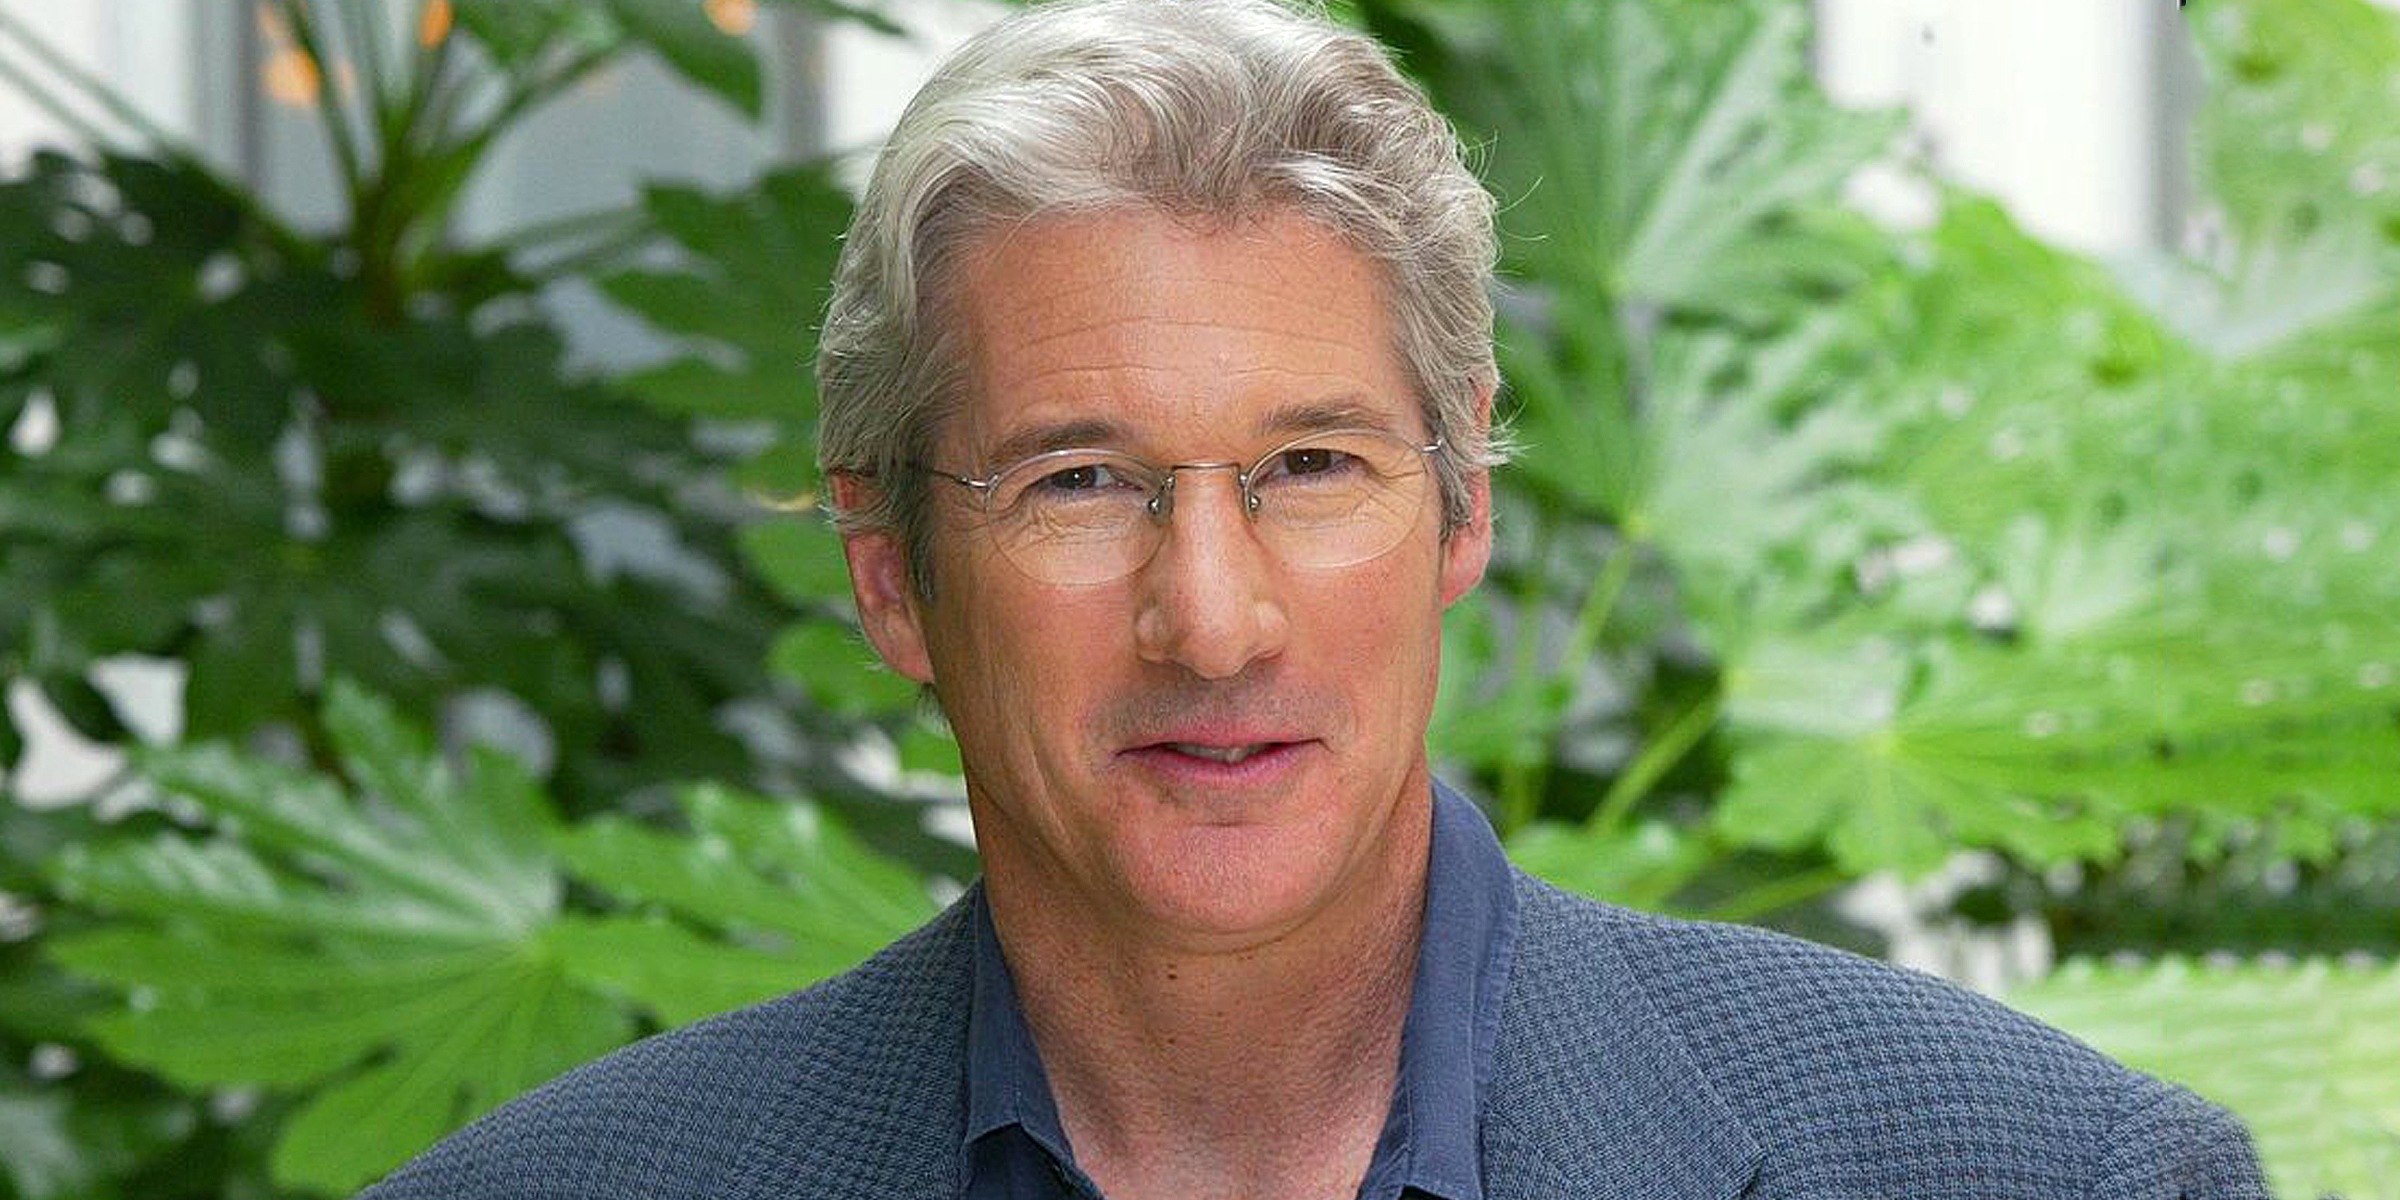 Richard Gere, 2002 | Source: Getty Images